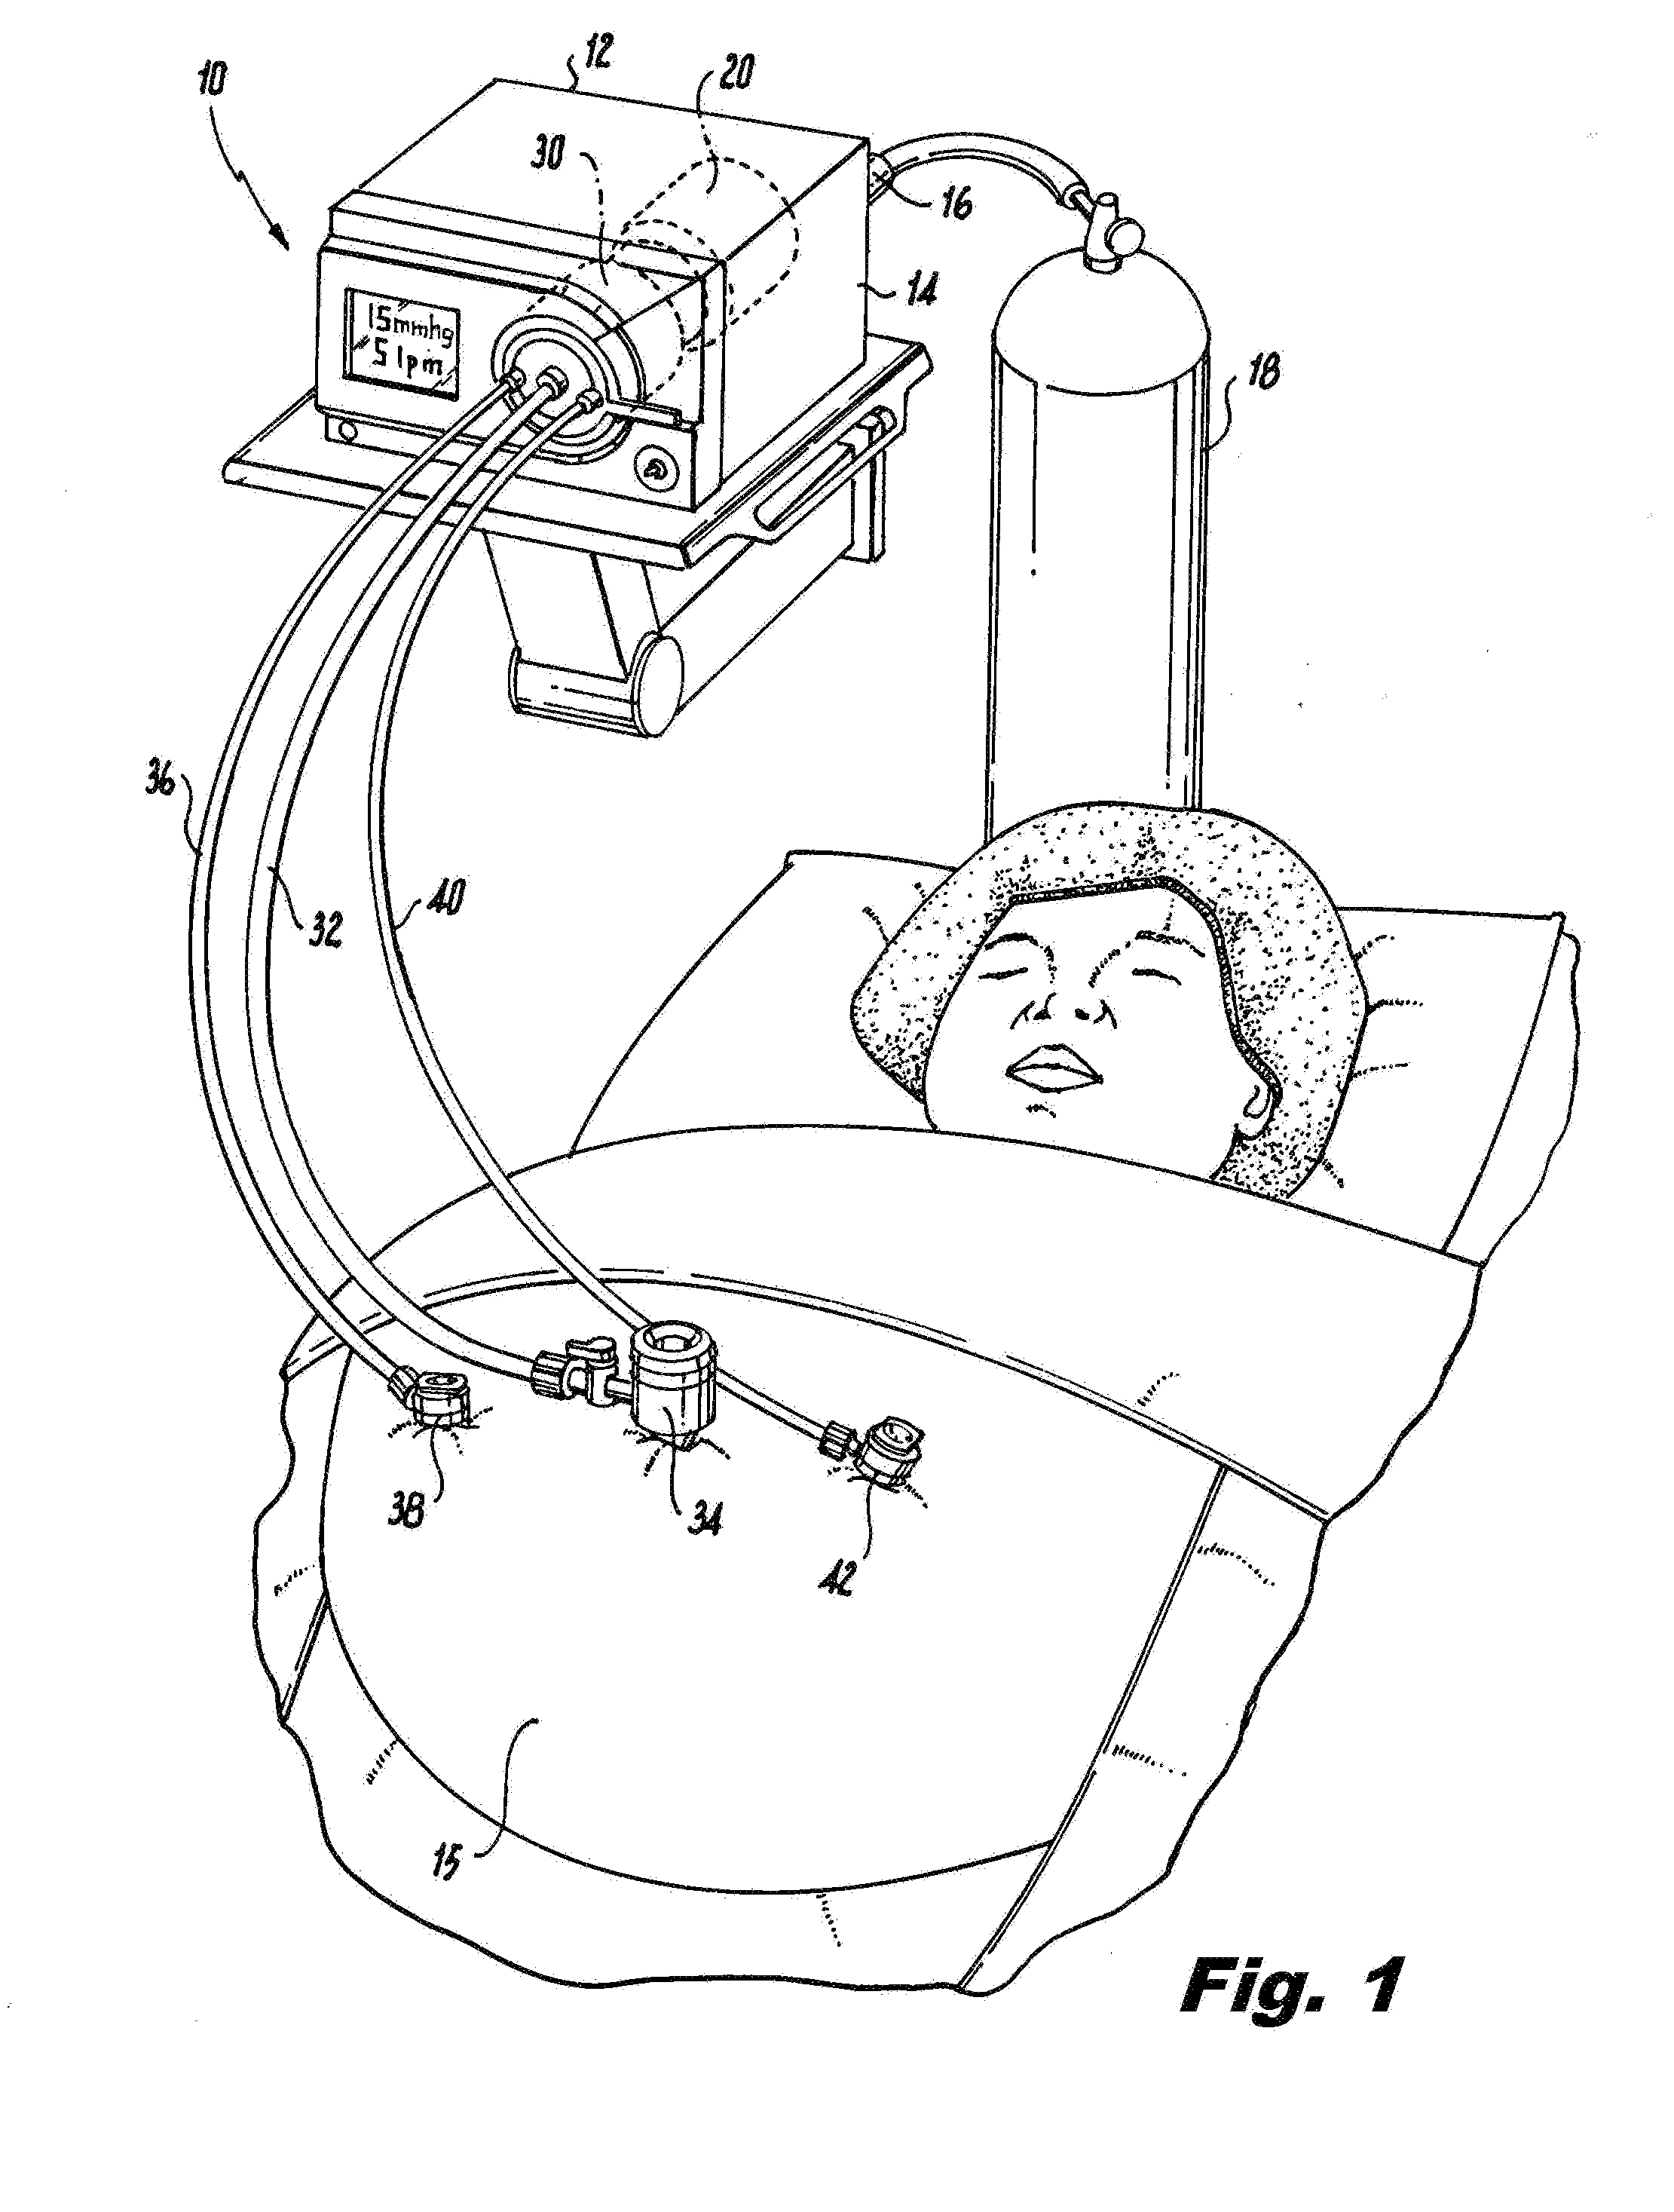 Filter cartridge with internal gaseous seal for multimodal surgical gas delivery system having a smoke evacuation mode